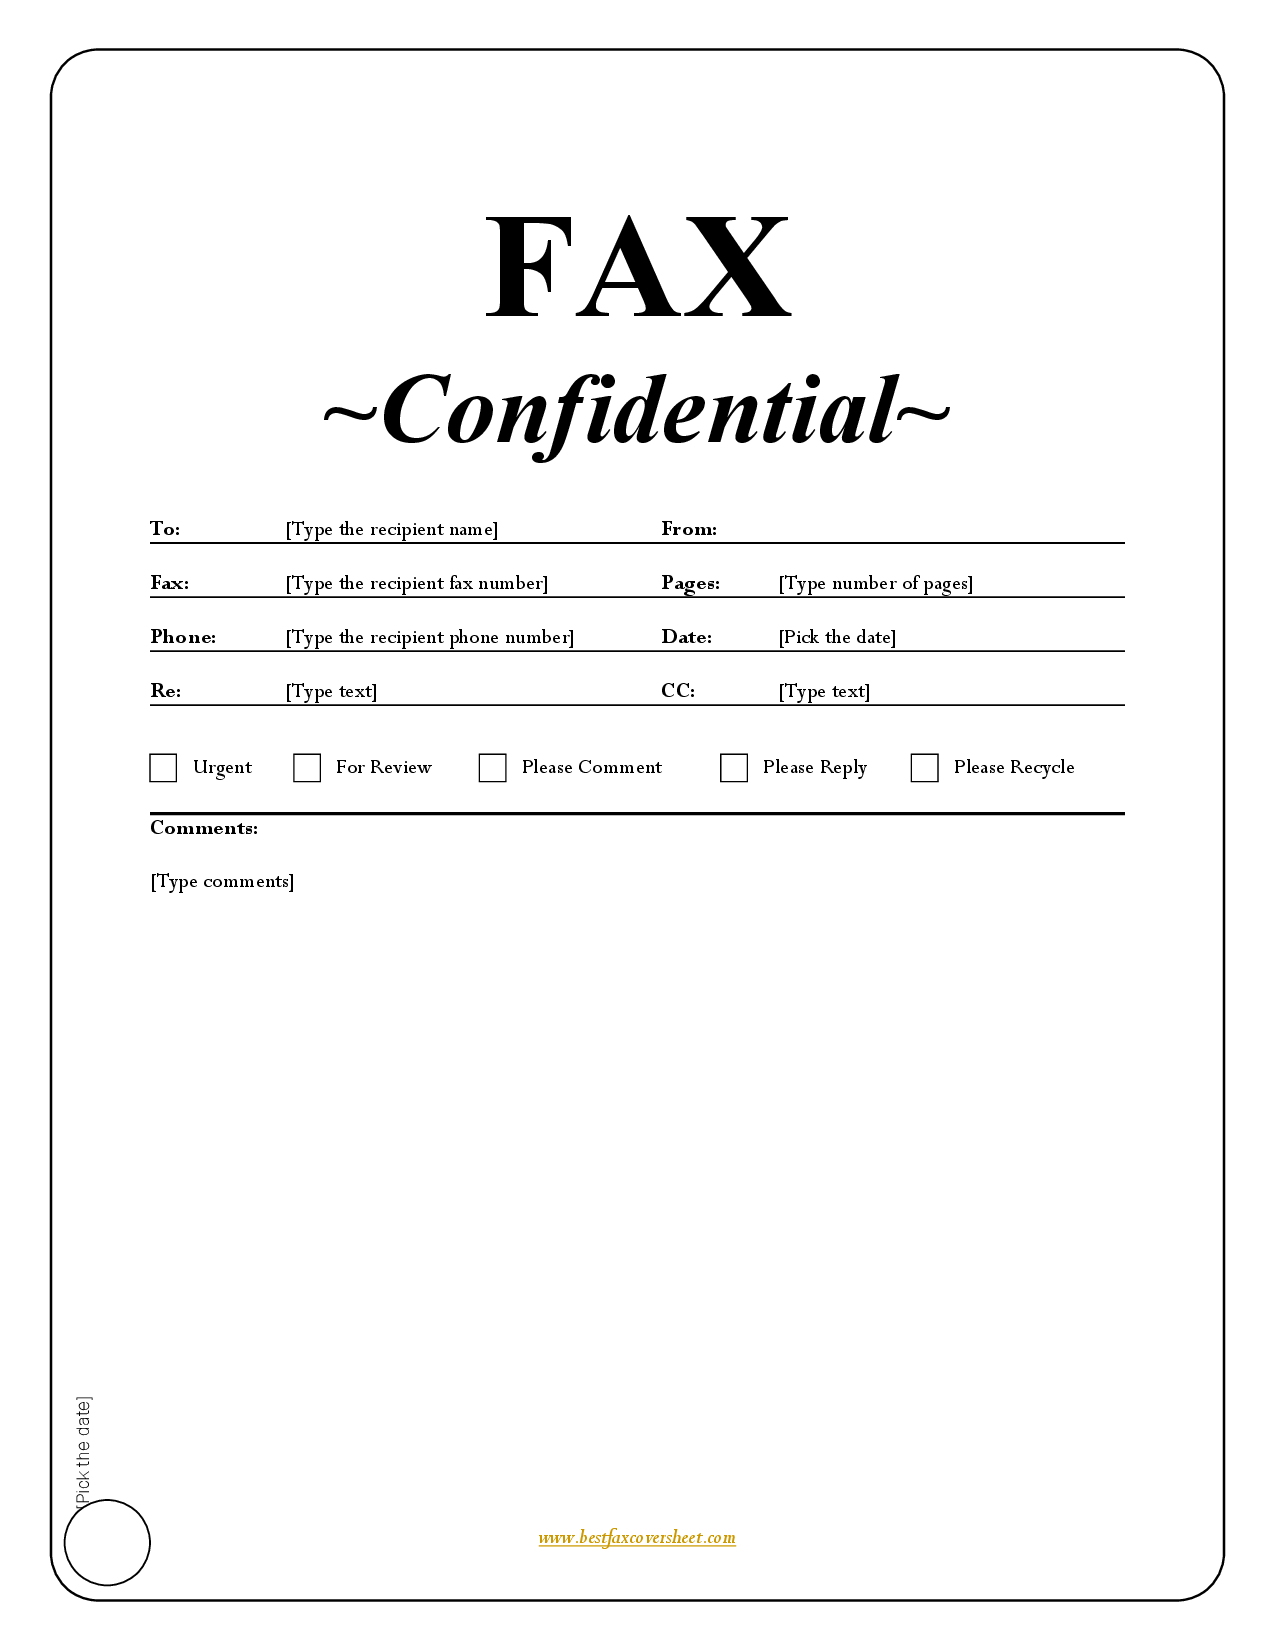 Fax Spreadsheet In Fax Sample Cover Sheet Template Printable Page Confidential 67279